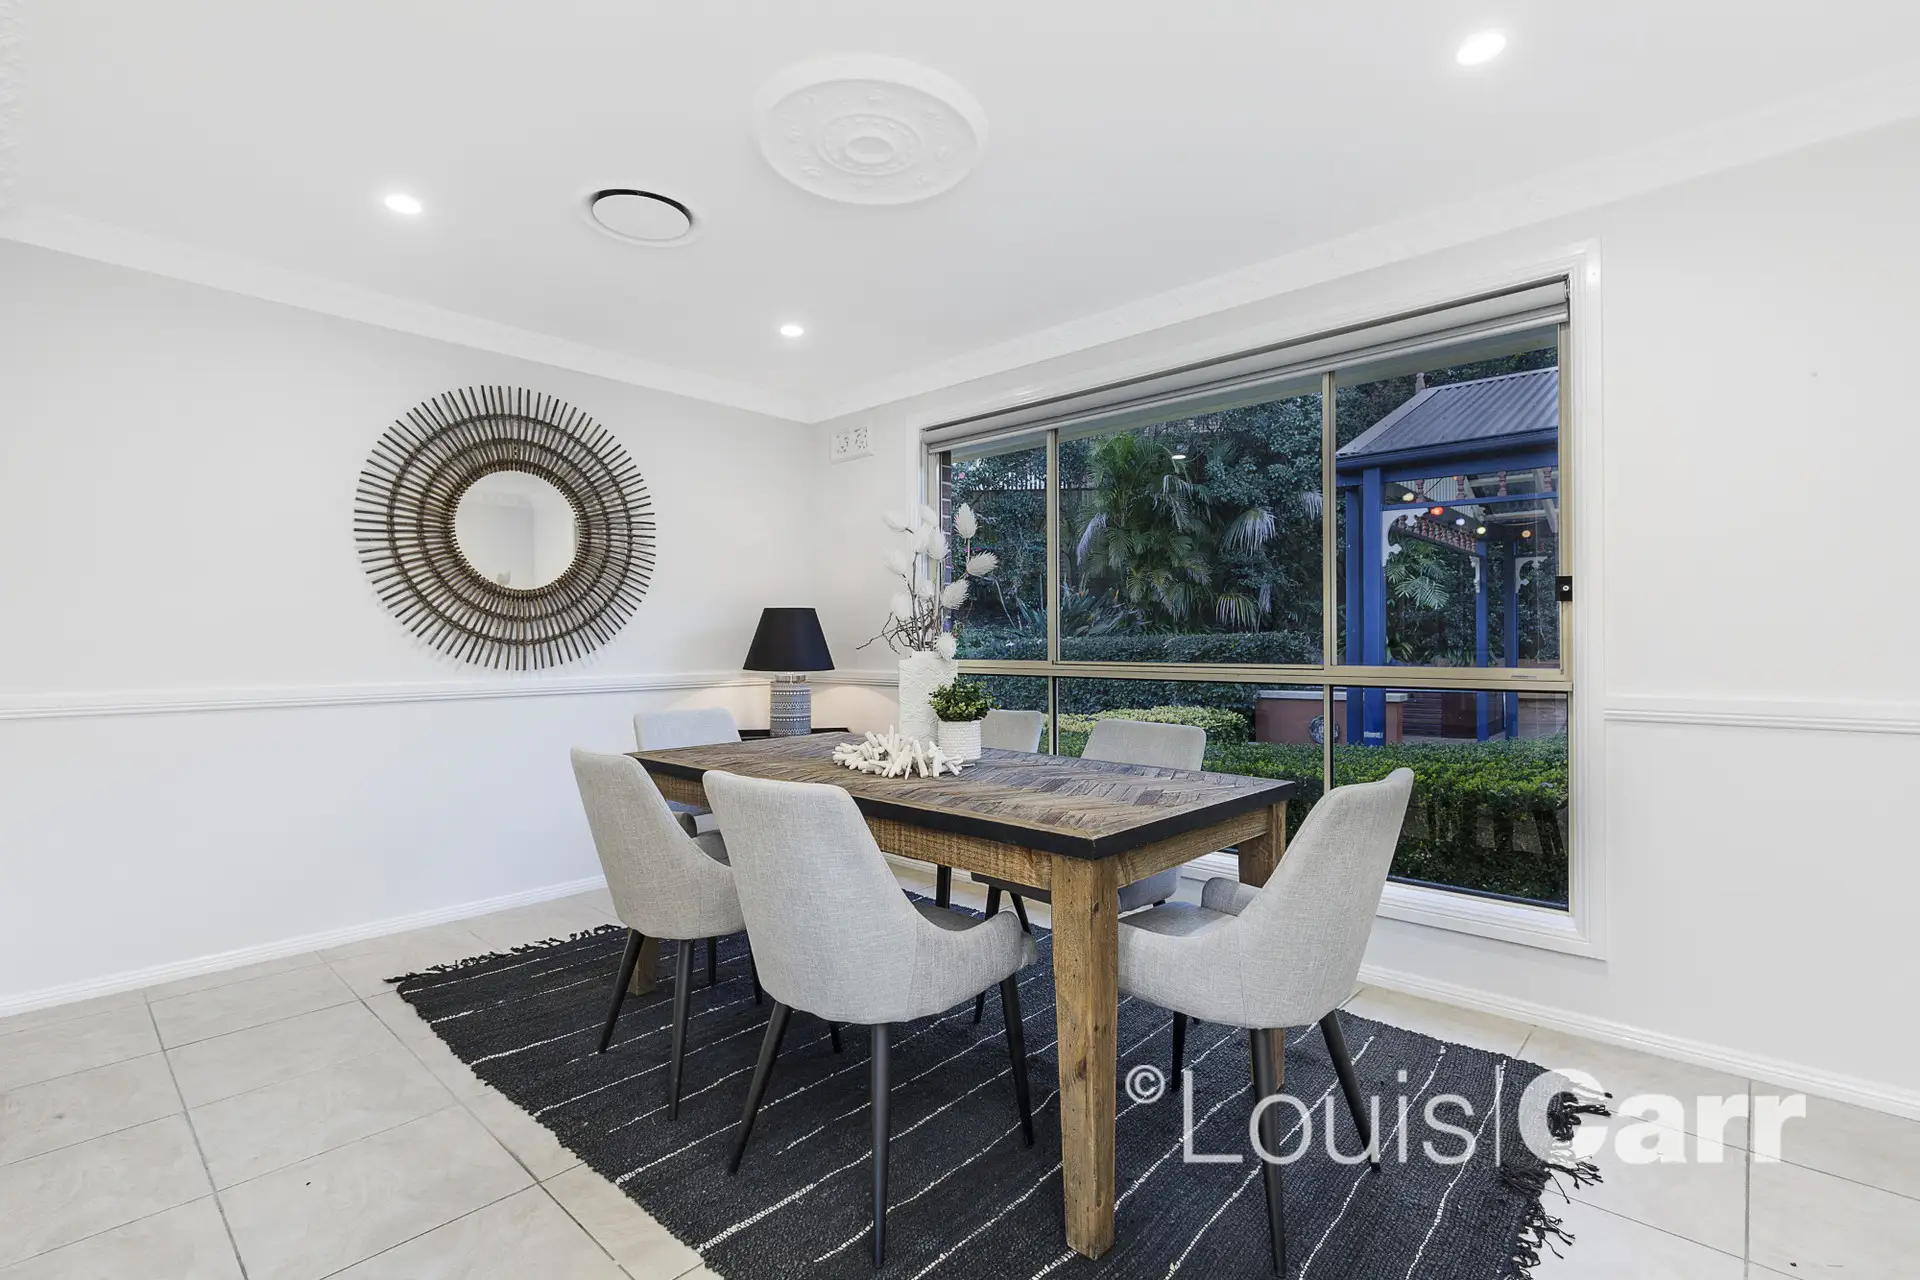 Photo #4: 35 Alana Drive, West Pennant Hills - Sold by Louis Carr Real Estate